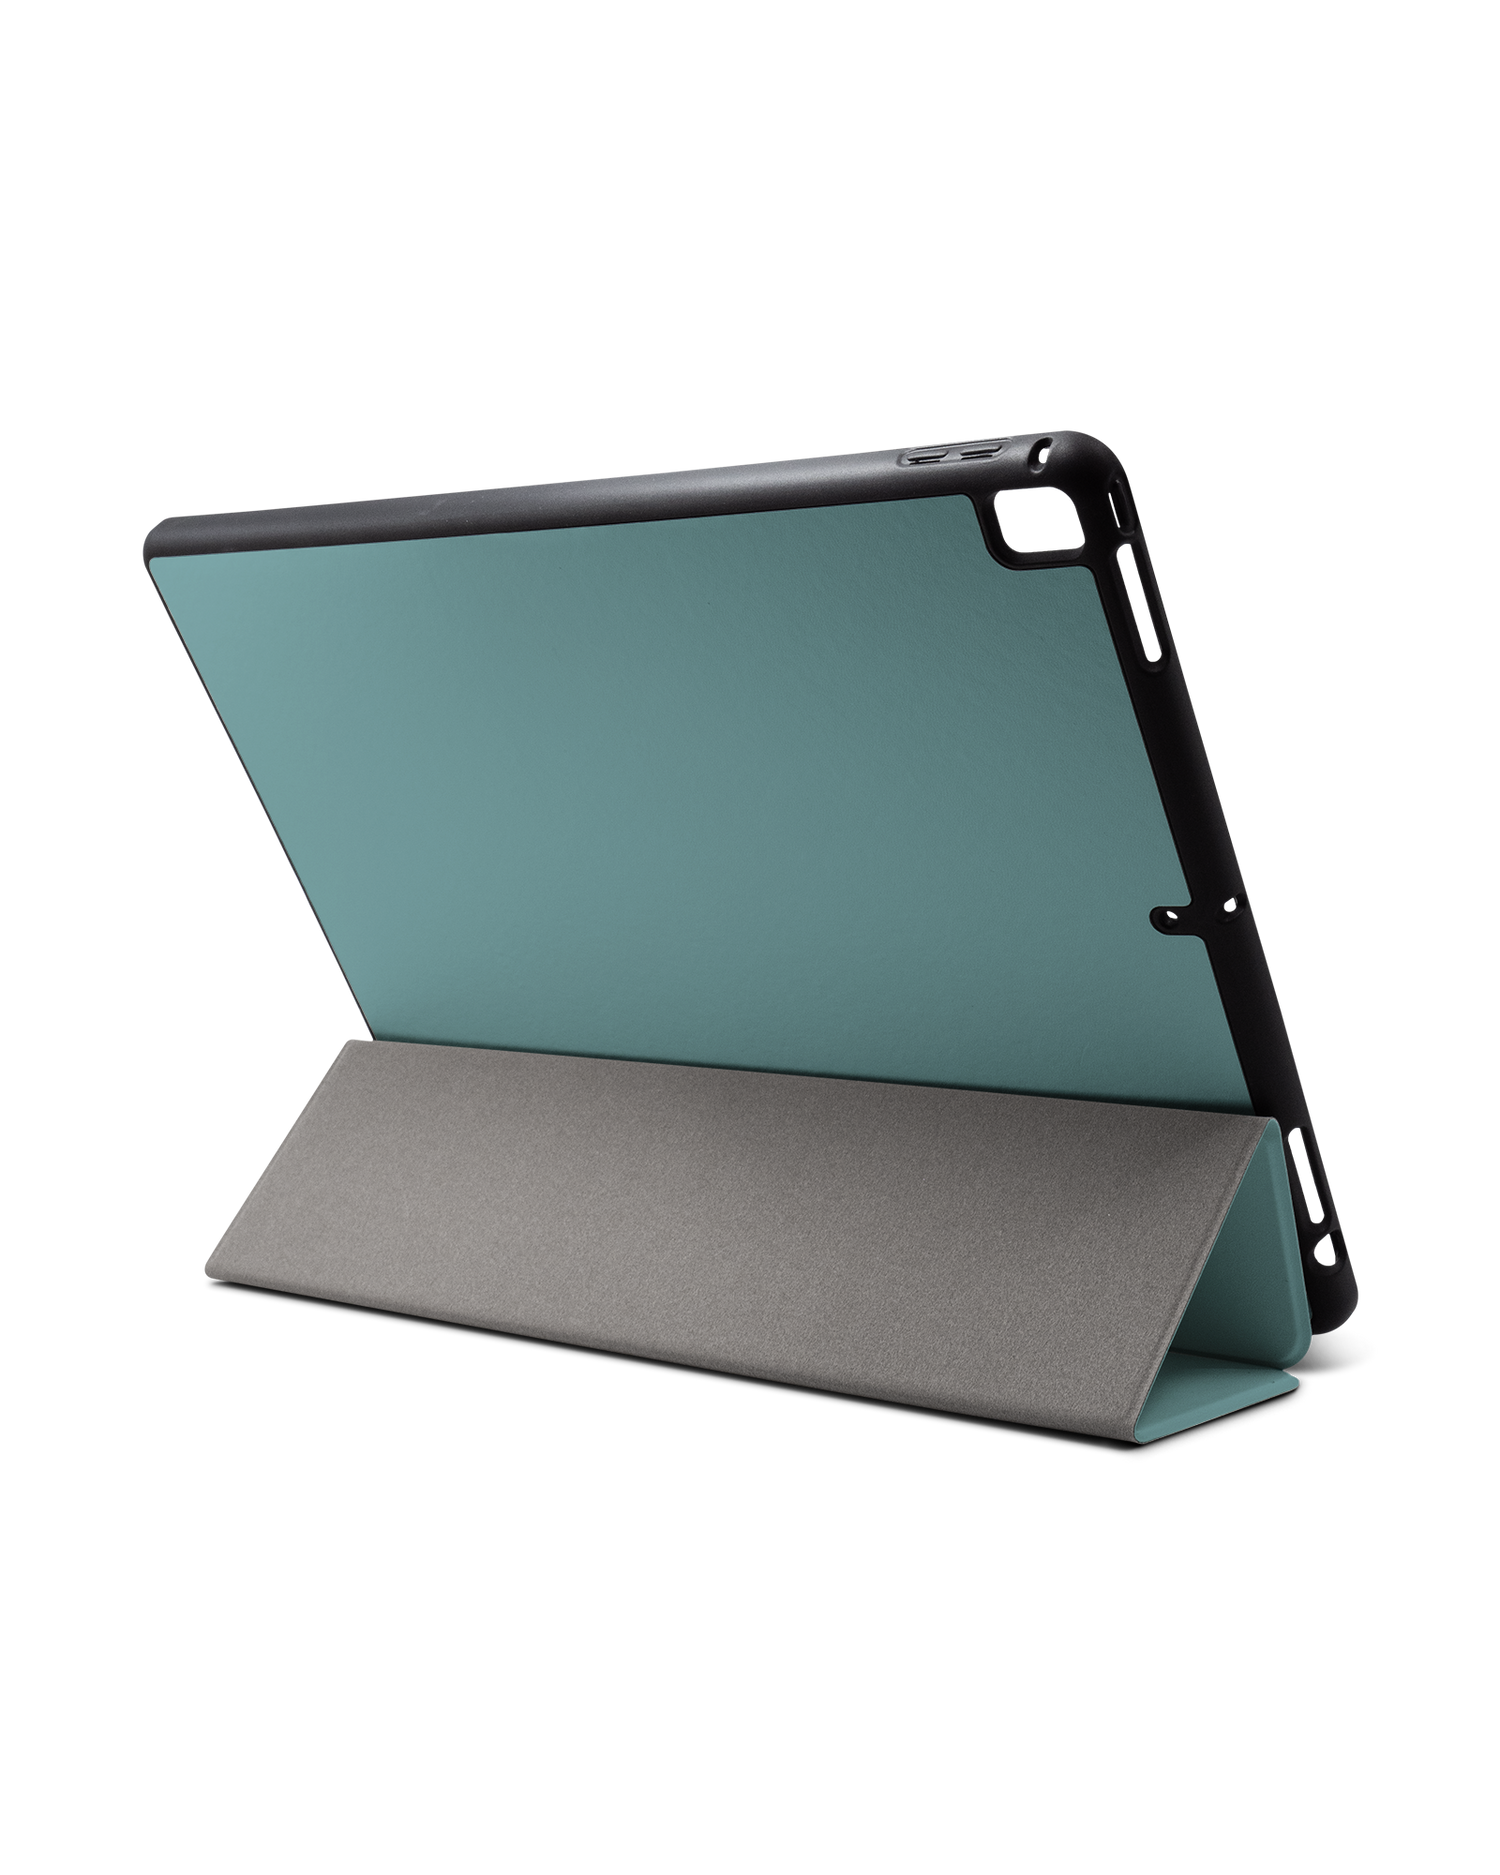 TURQUOISE iPad Case with Pencil Holder for Apple iPad Pro 2 12.9